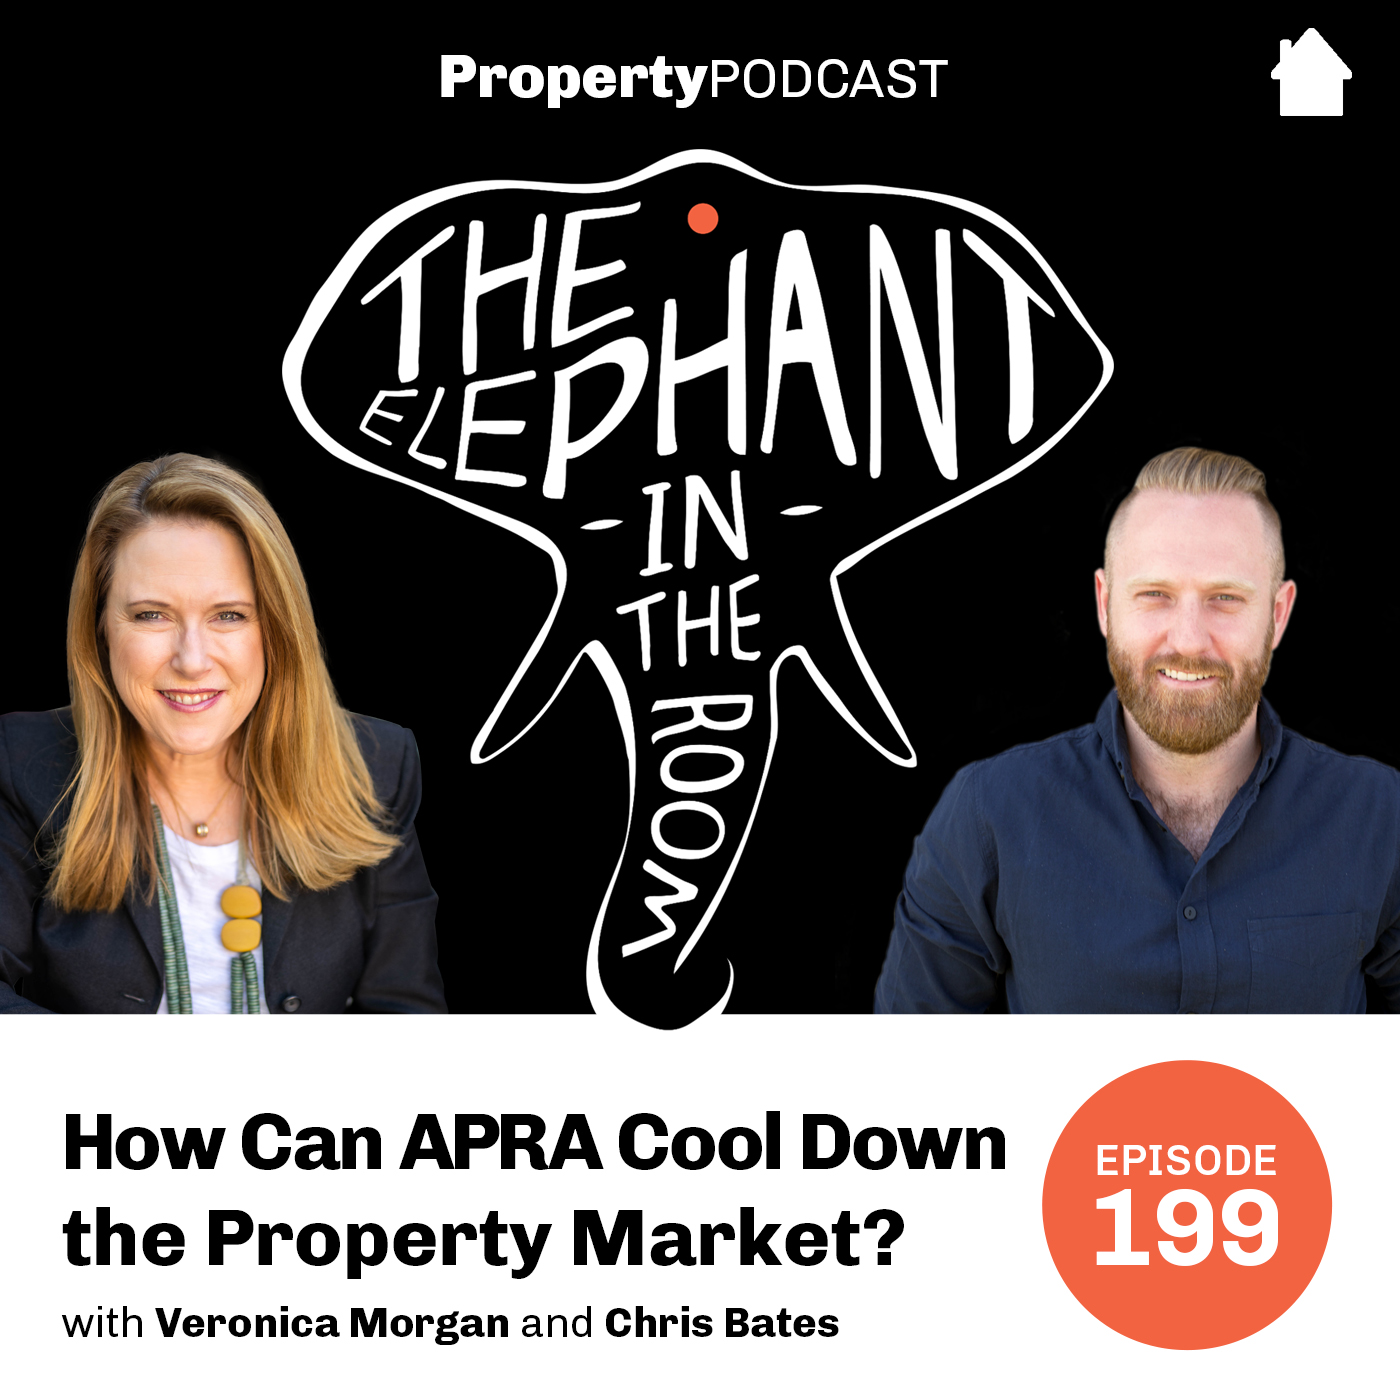 Chris & Veronica | How Can APRA Cool Down the Property Market?